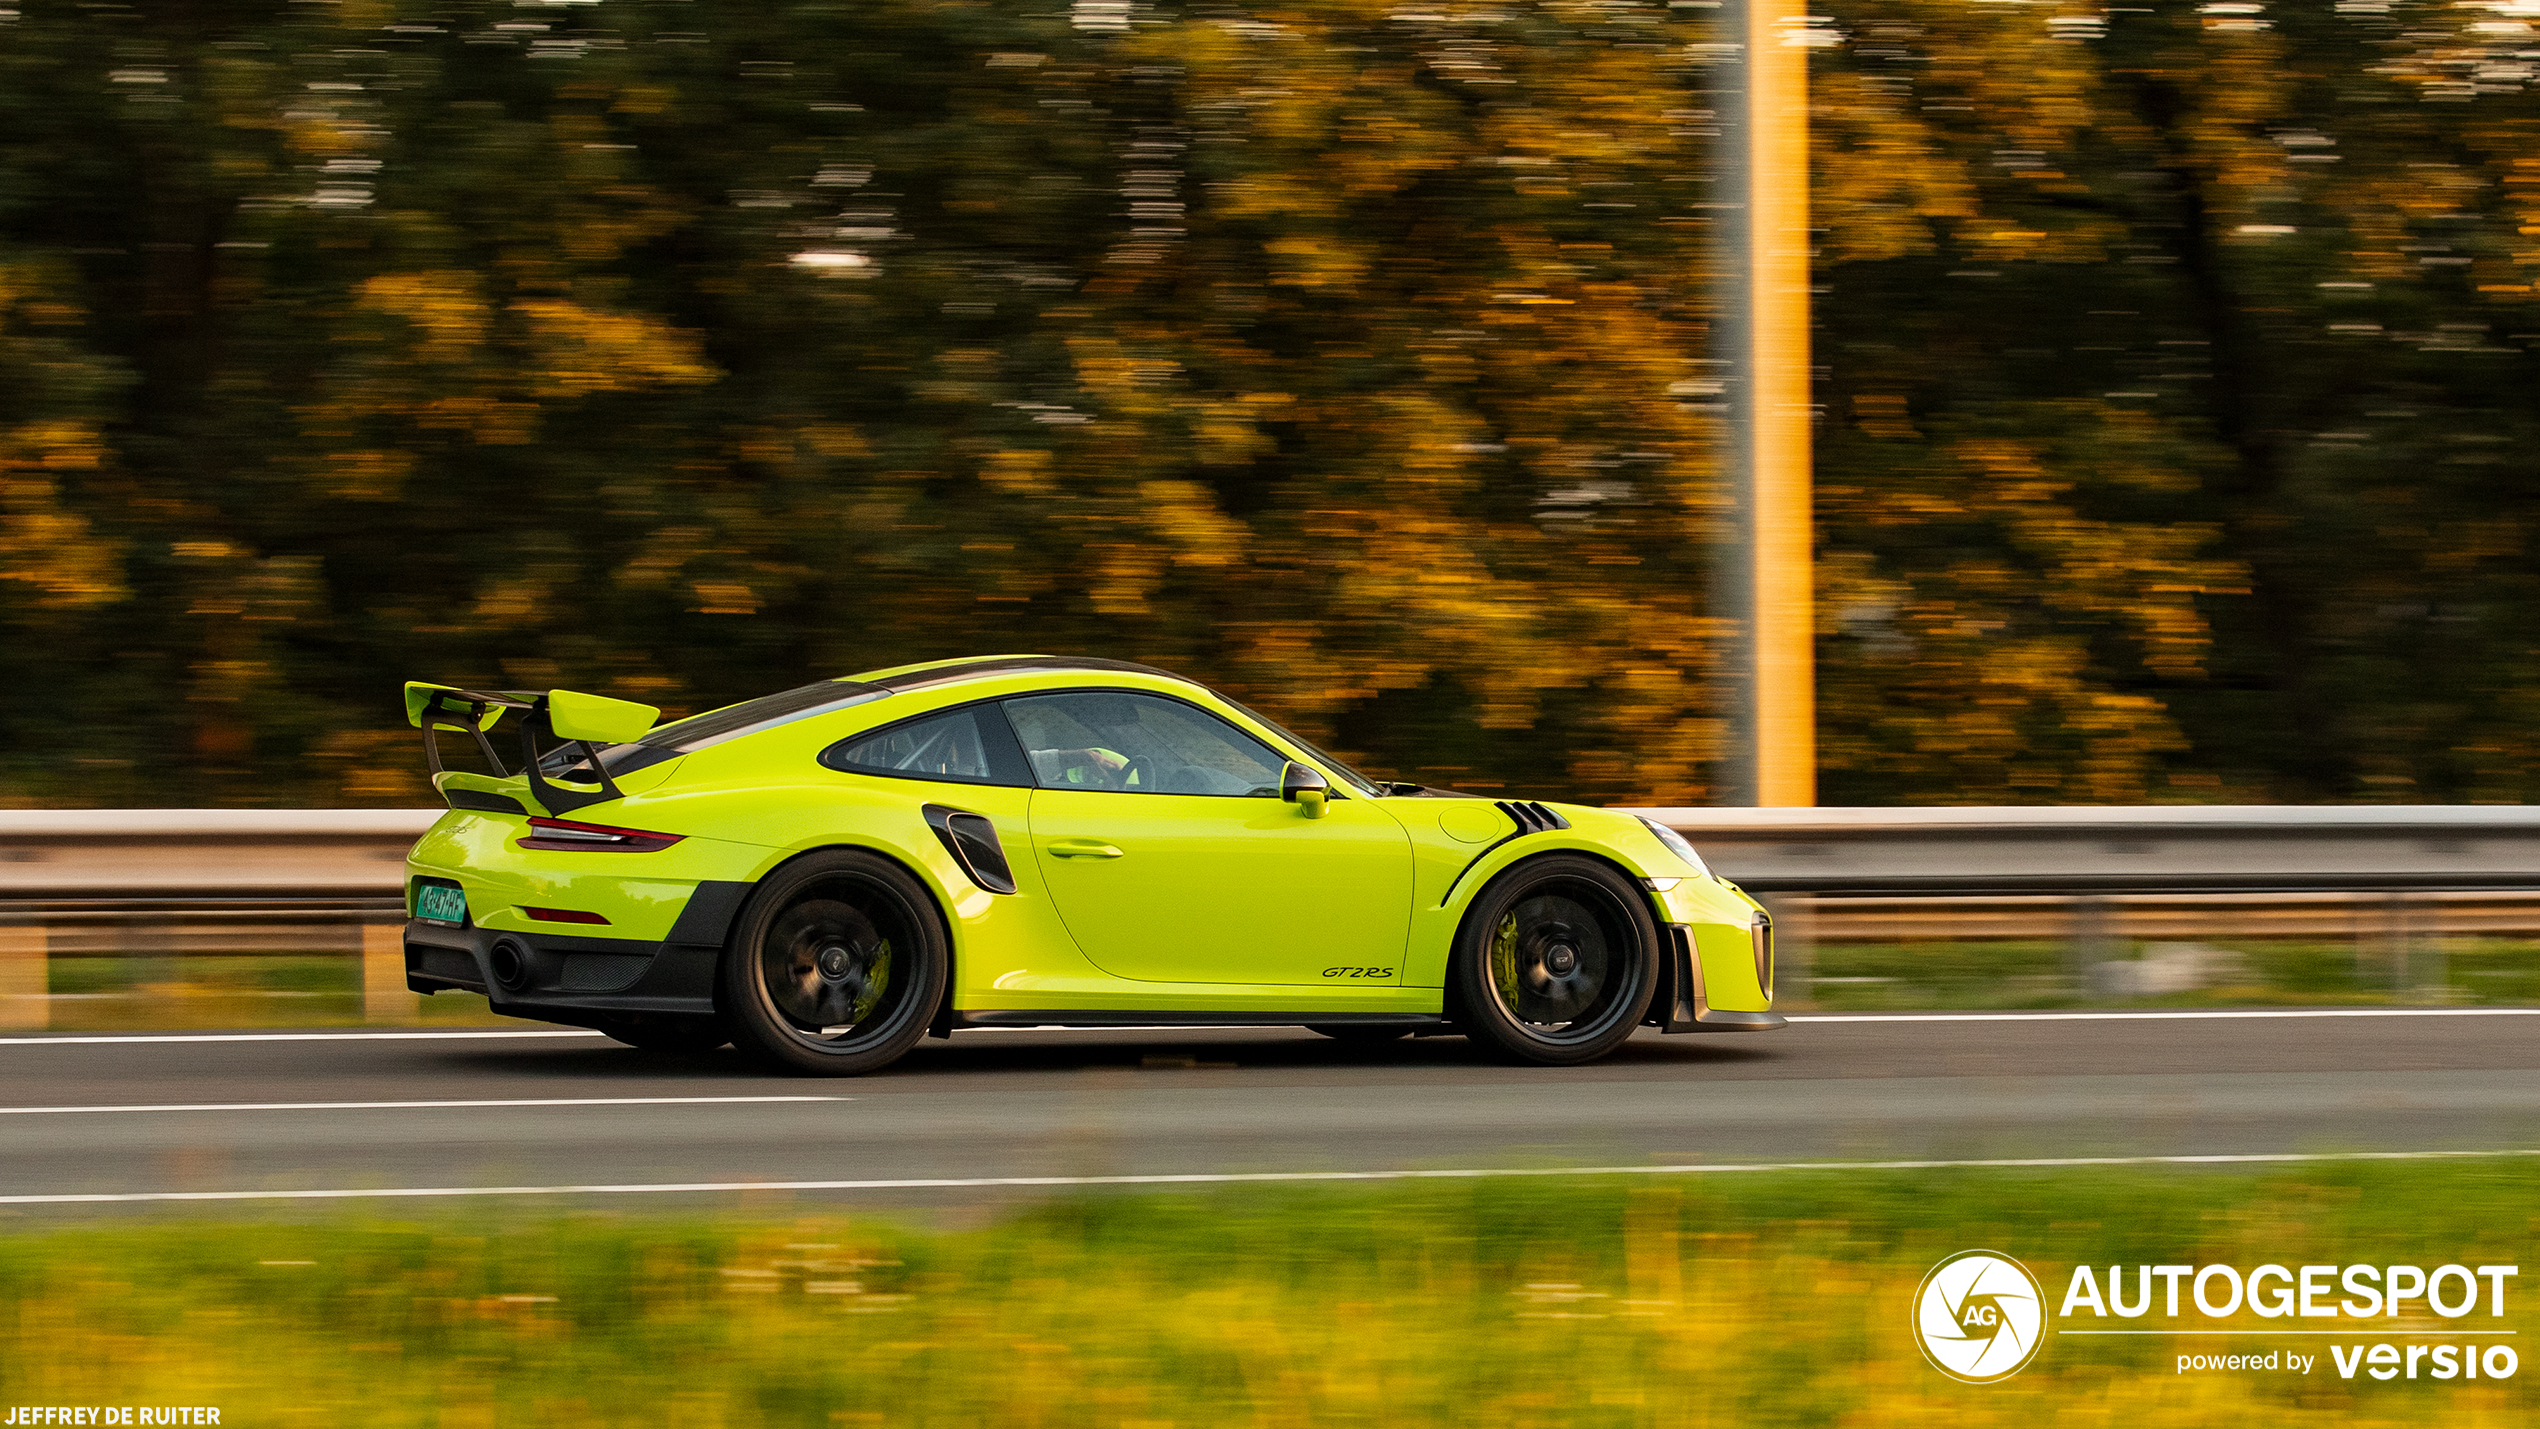 A pretty cool GT2 RS races down the highway